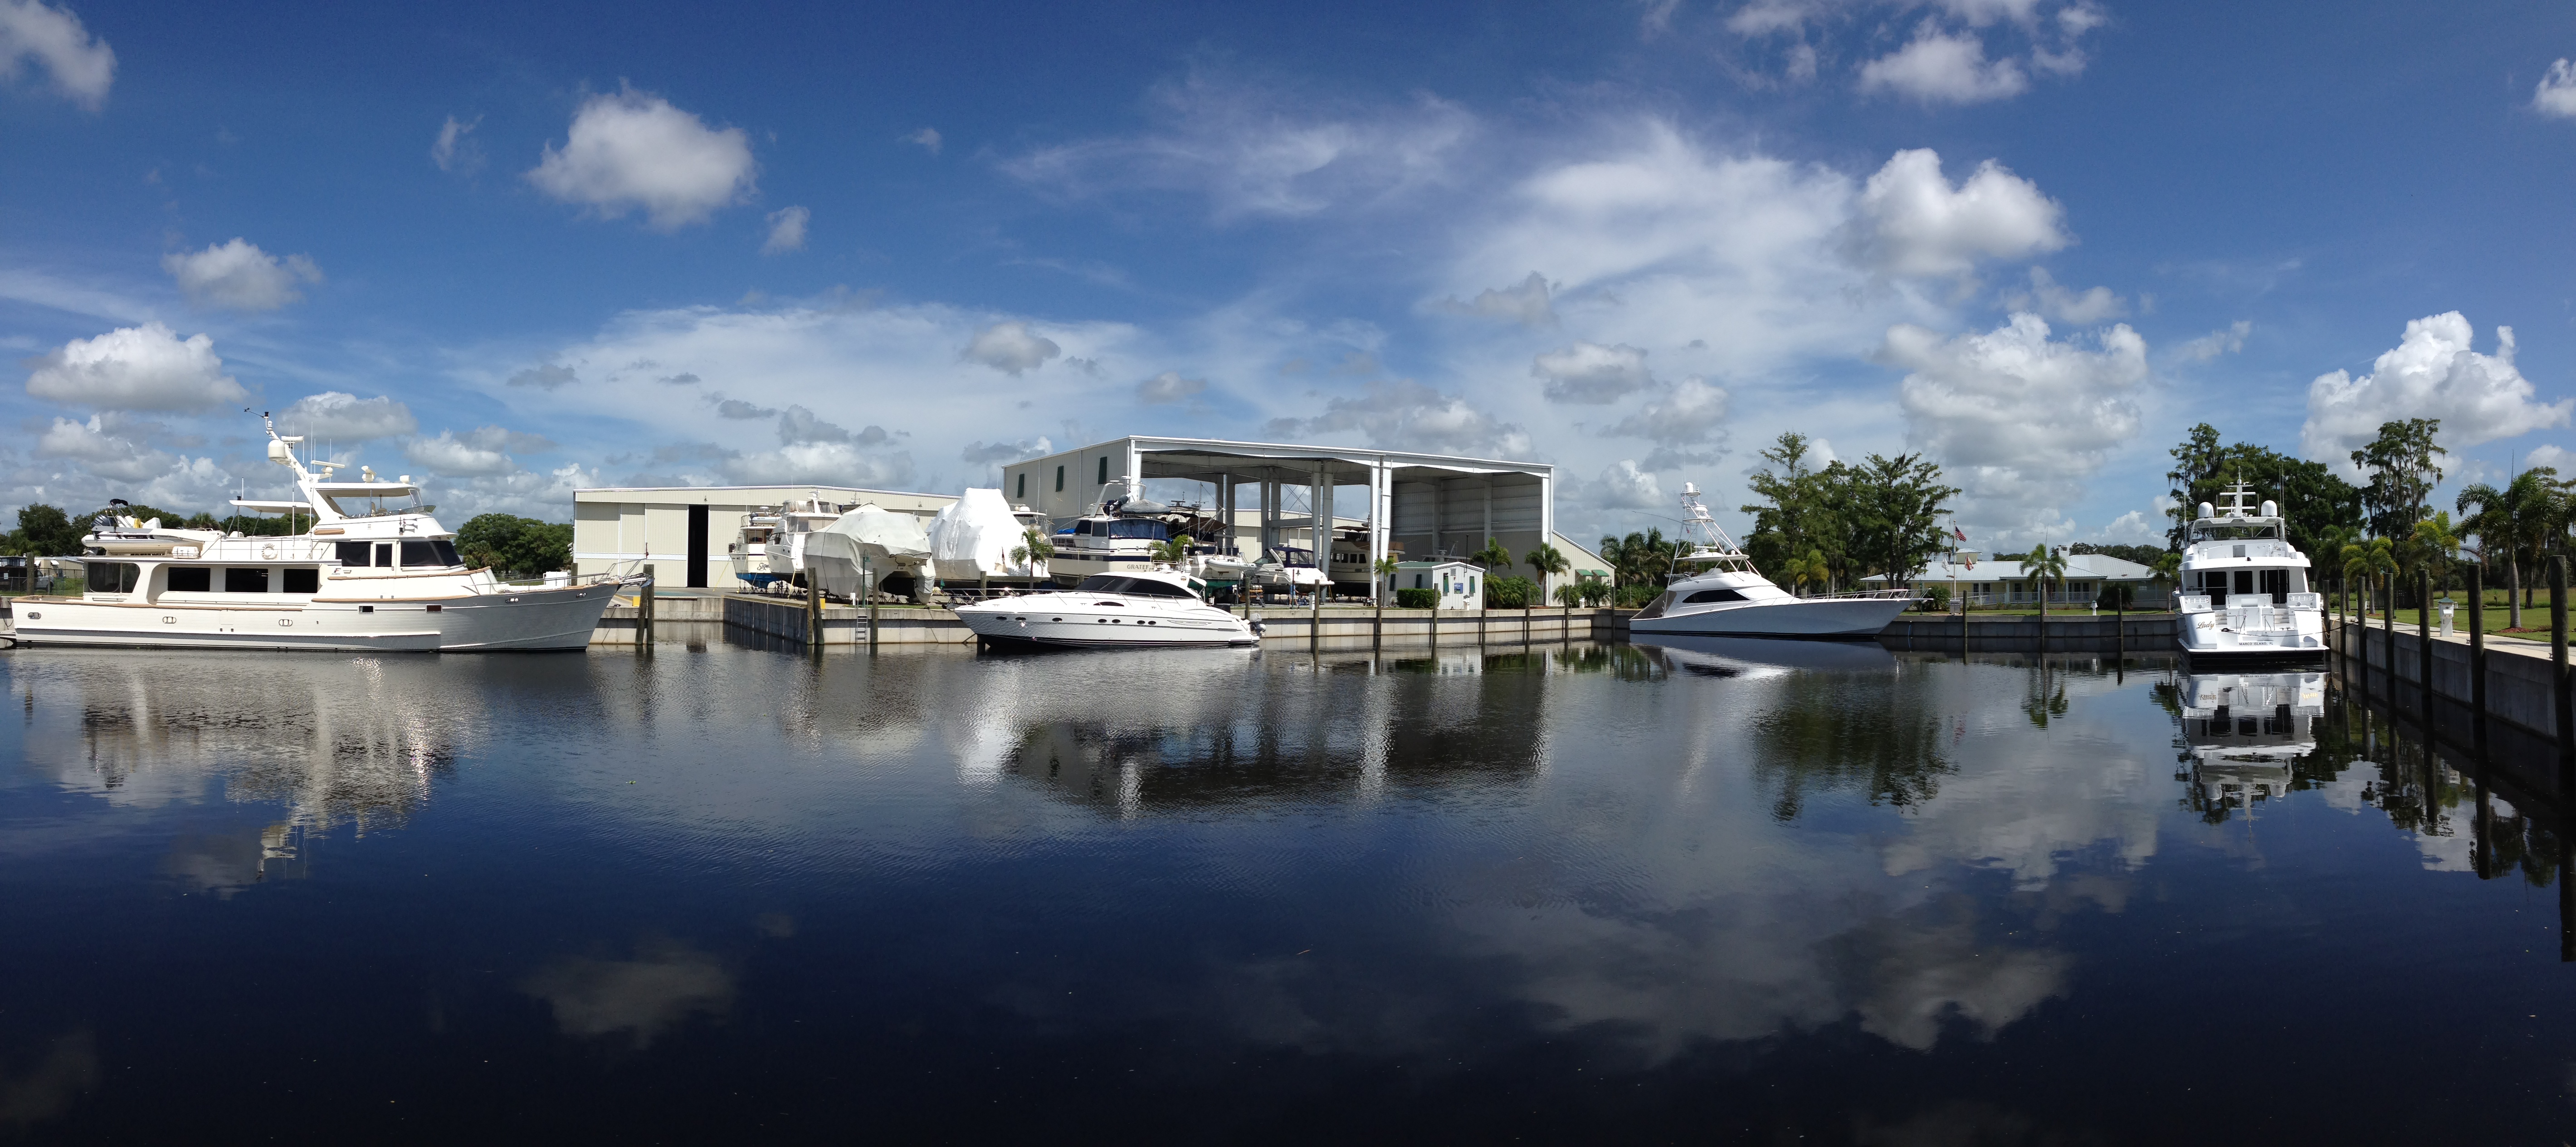 River Forest Yachting Center - LaBelle in Moore Haven, FL